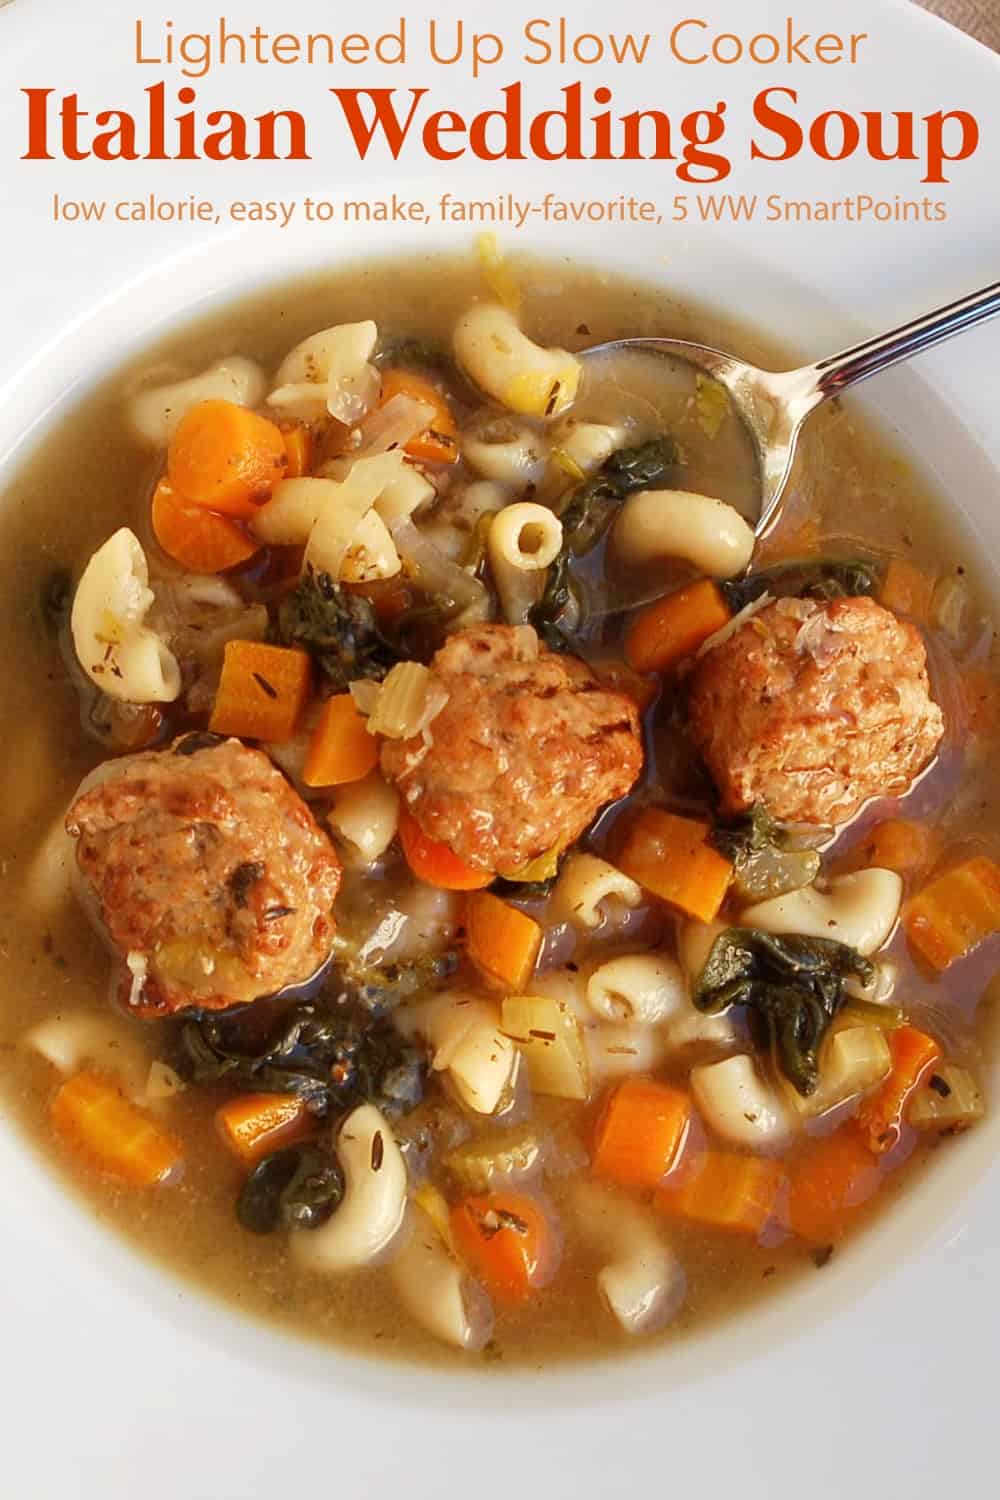 Slow Cooker Italian Wedding Soup in white bowl with spoon from above.